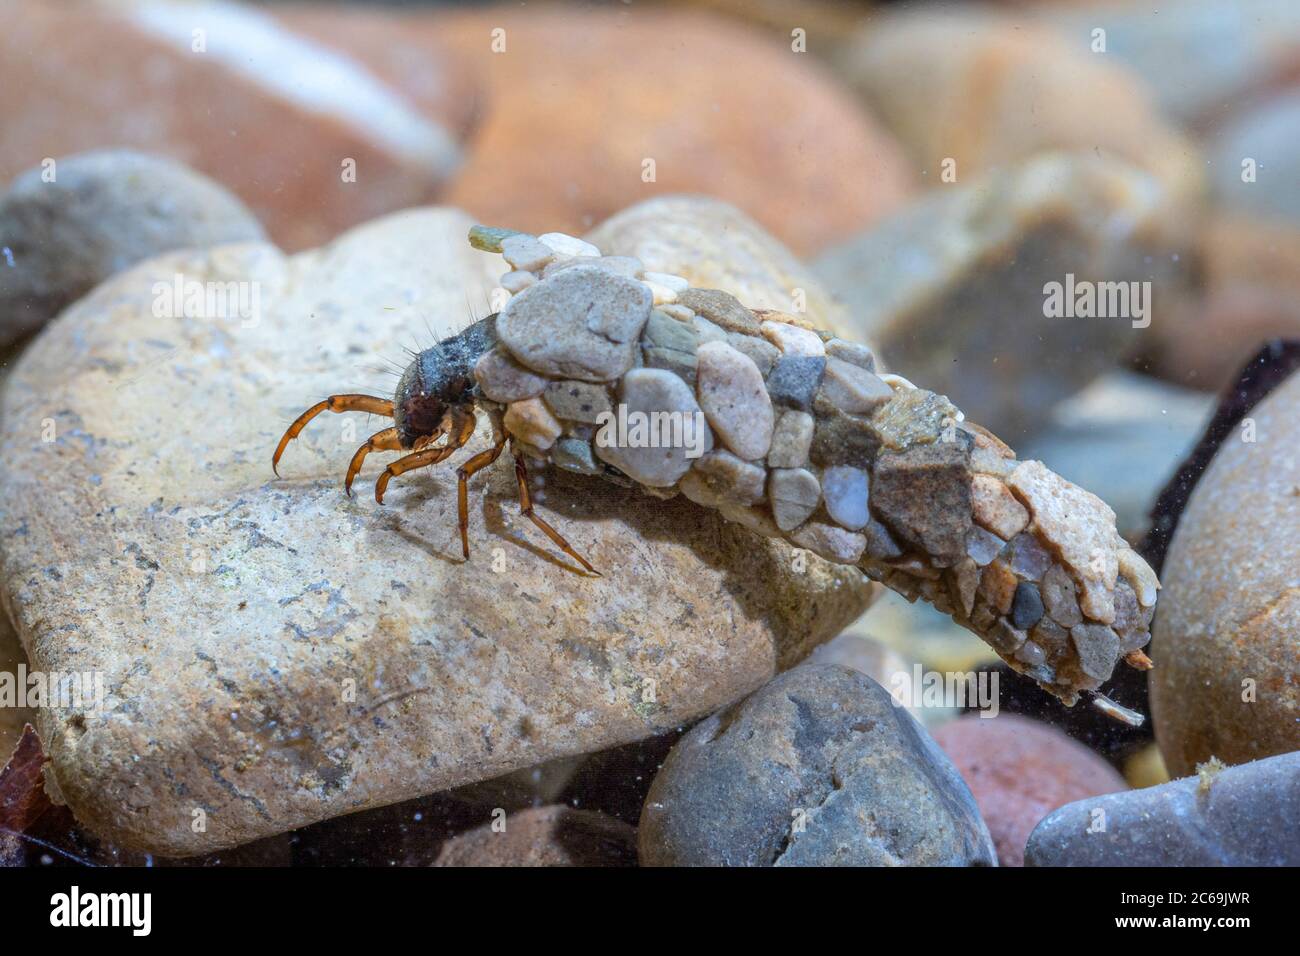 caddis flies (Trichoptera), on pebbles with case made from small stones, Germany Stock Photo